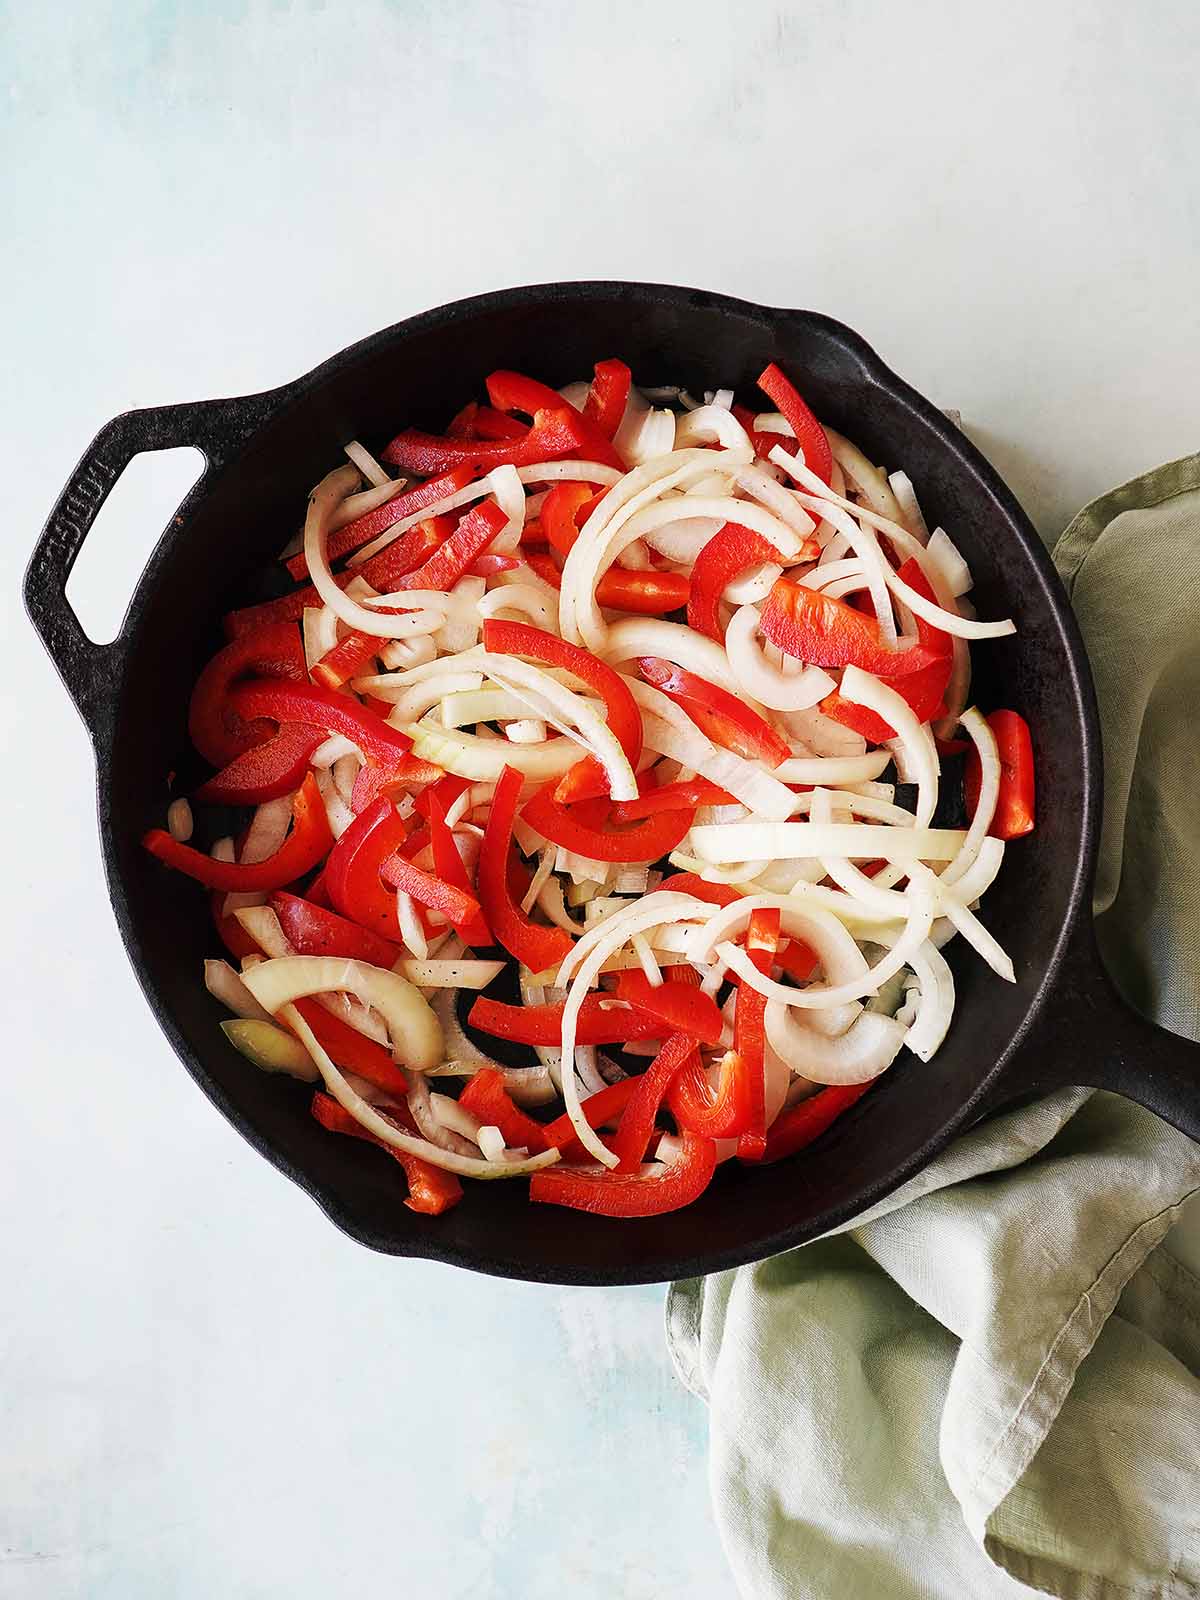 An iron skillet sauteing onions and red bell peppers.